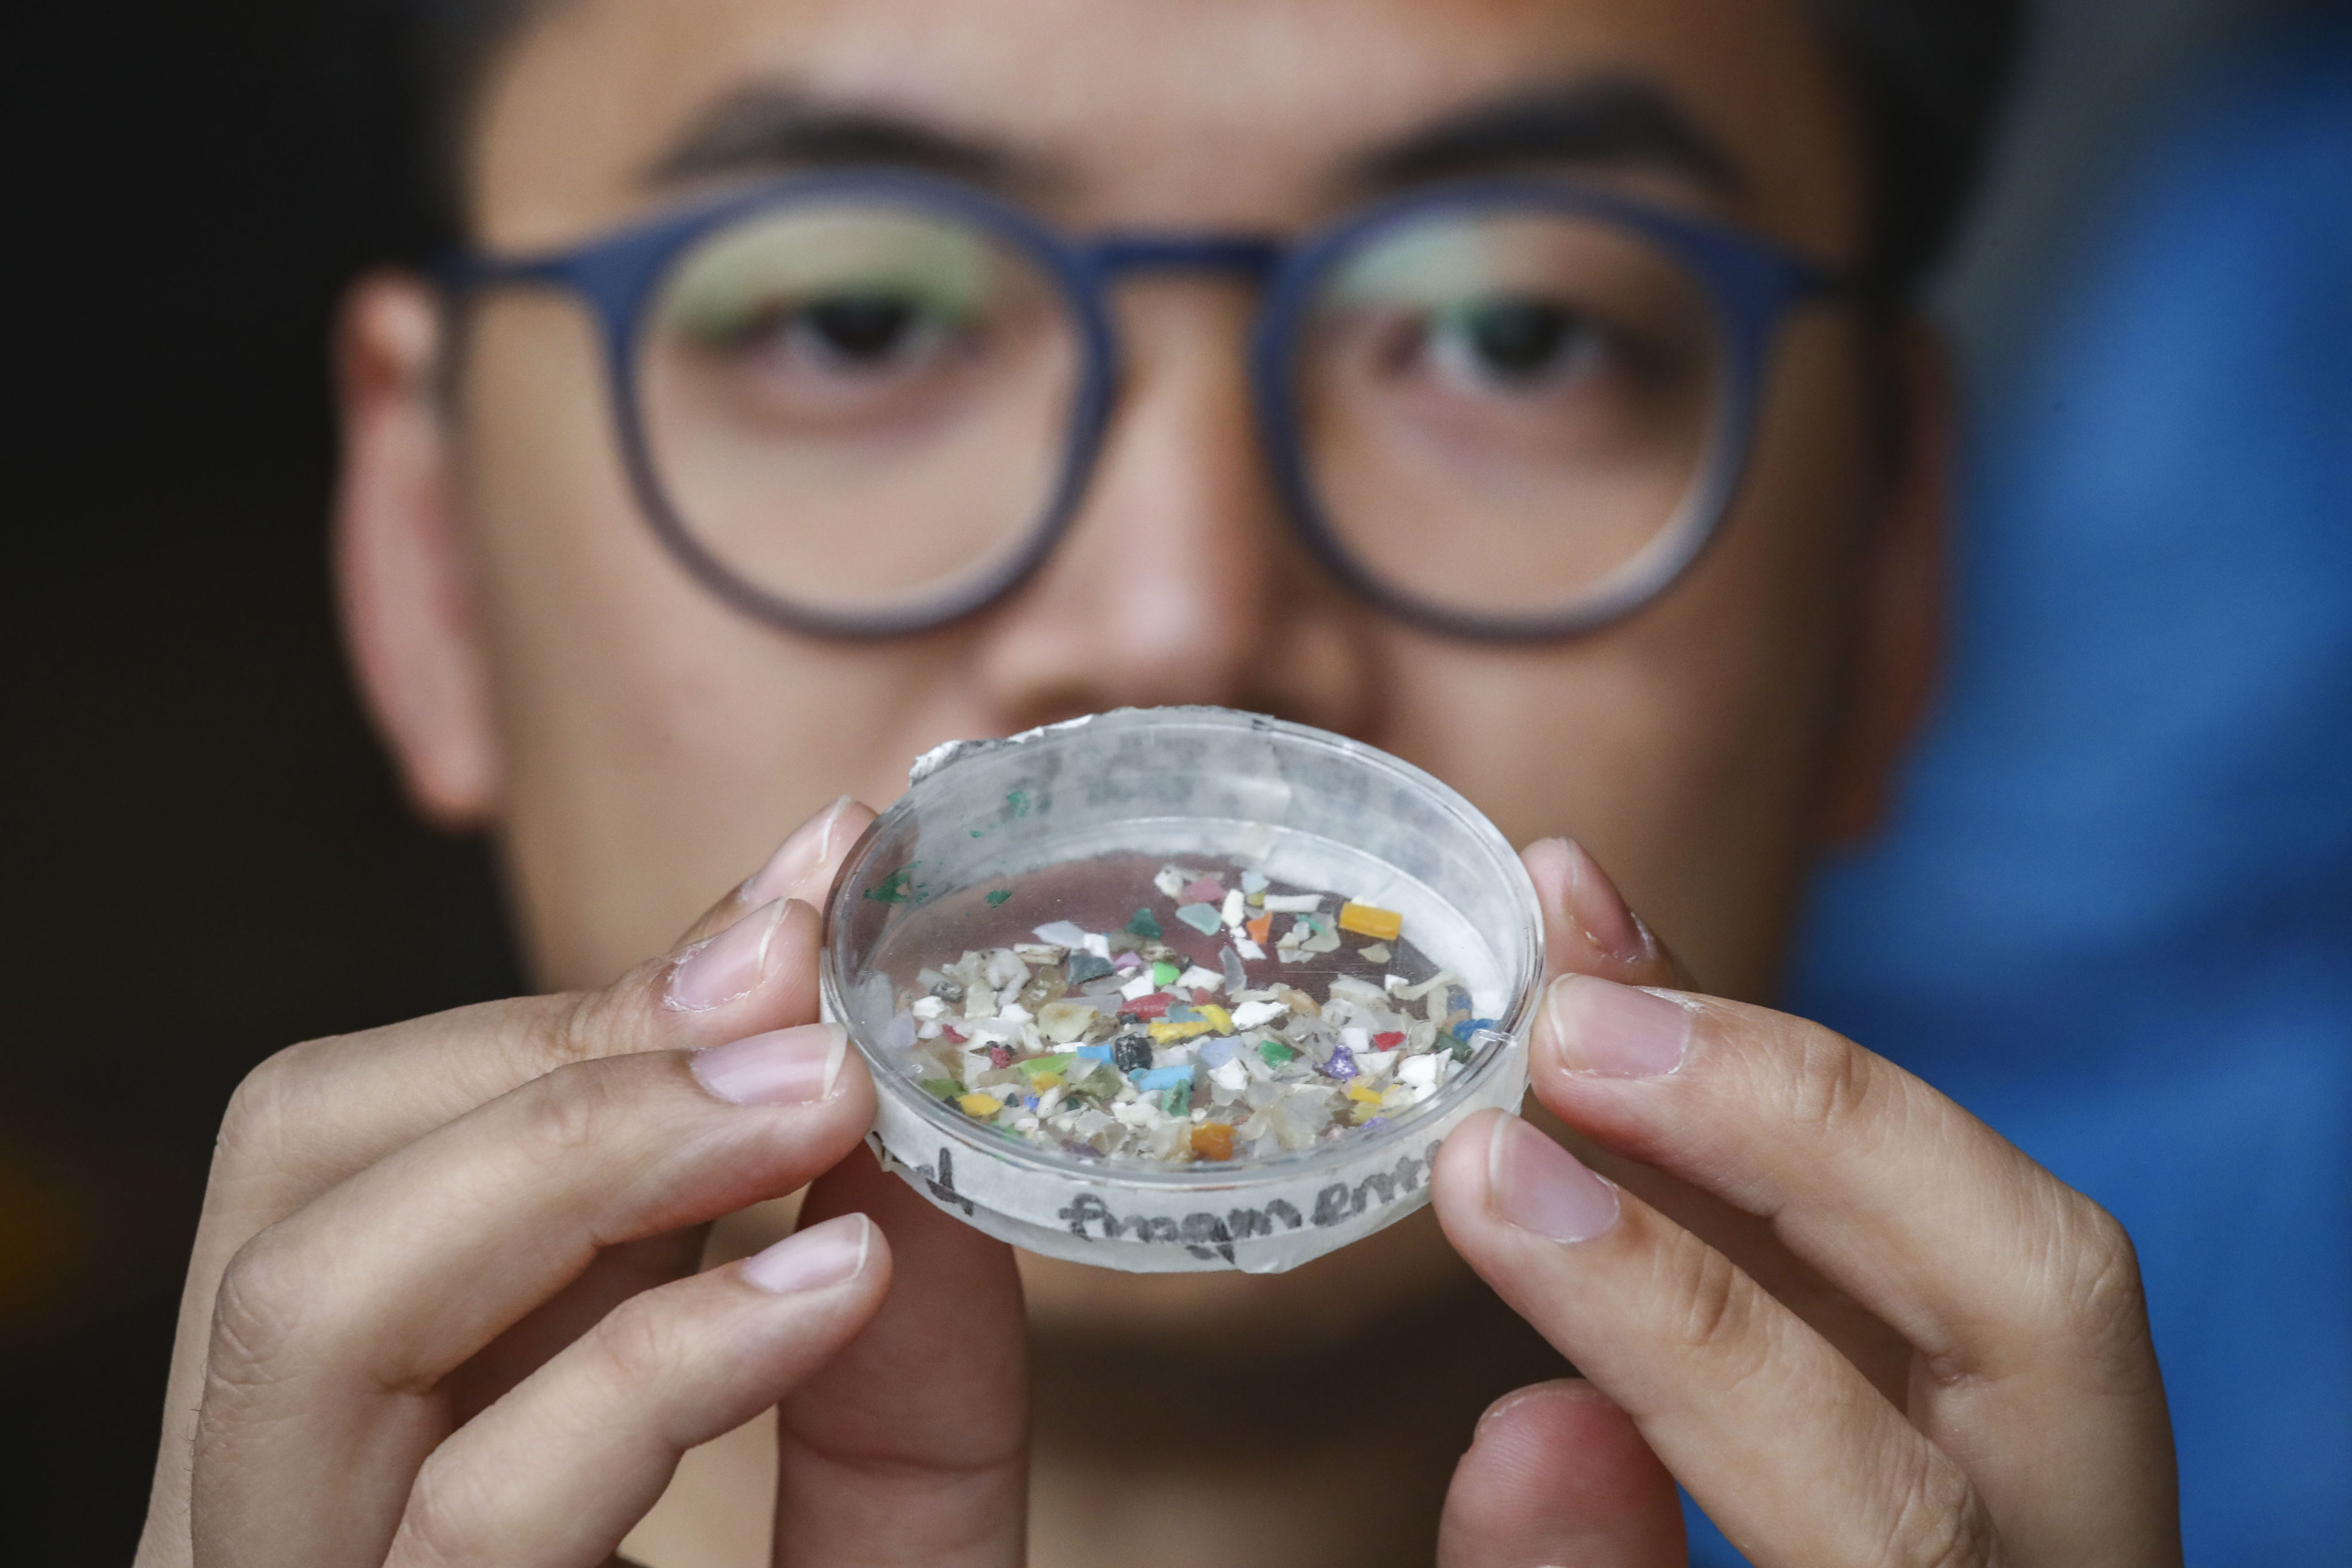 A Greenpeace campaigner shows samples of microplastics collected from the South China Sea. More than 50 per cent of Malaysia’s microplastic consumption comes from fish, the report found. Photo: Nora Tam